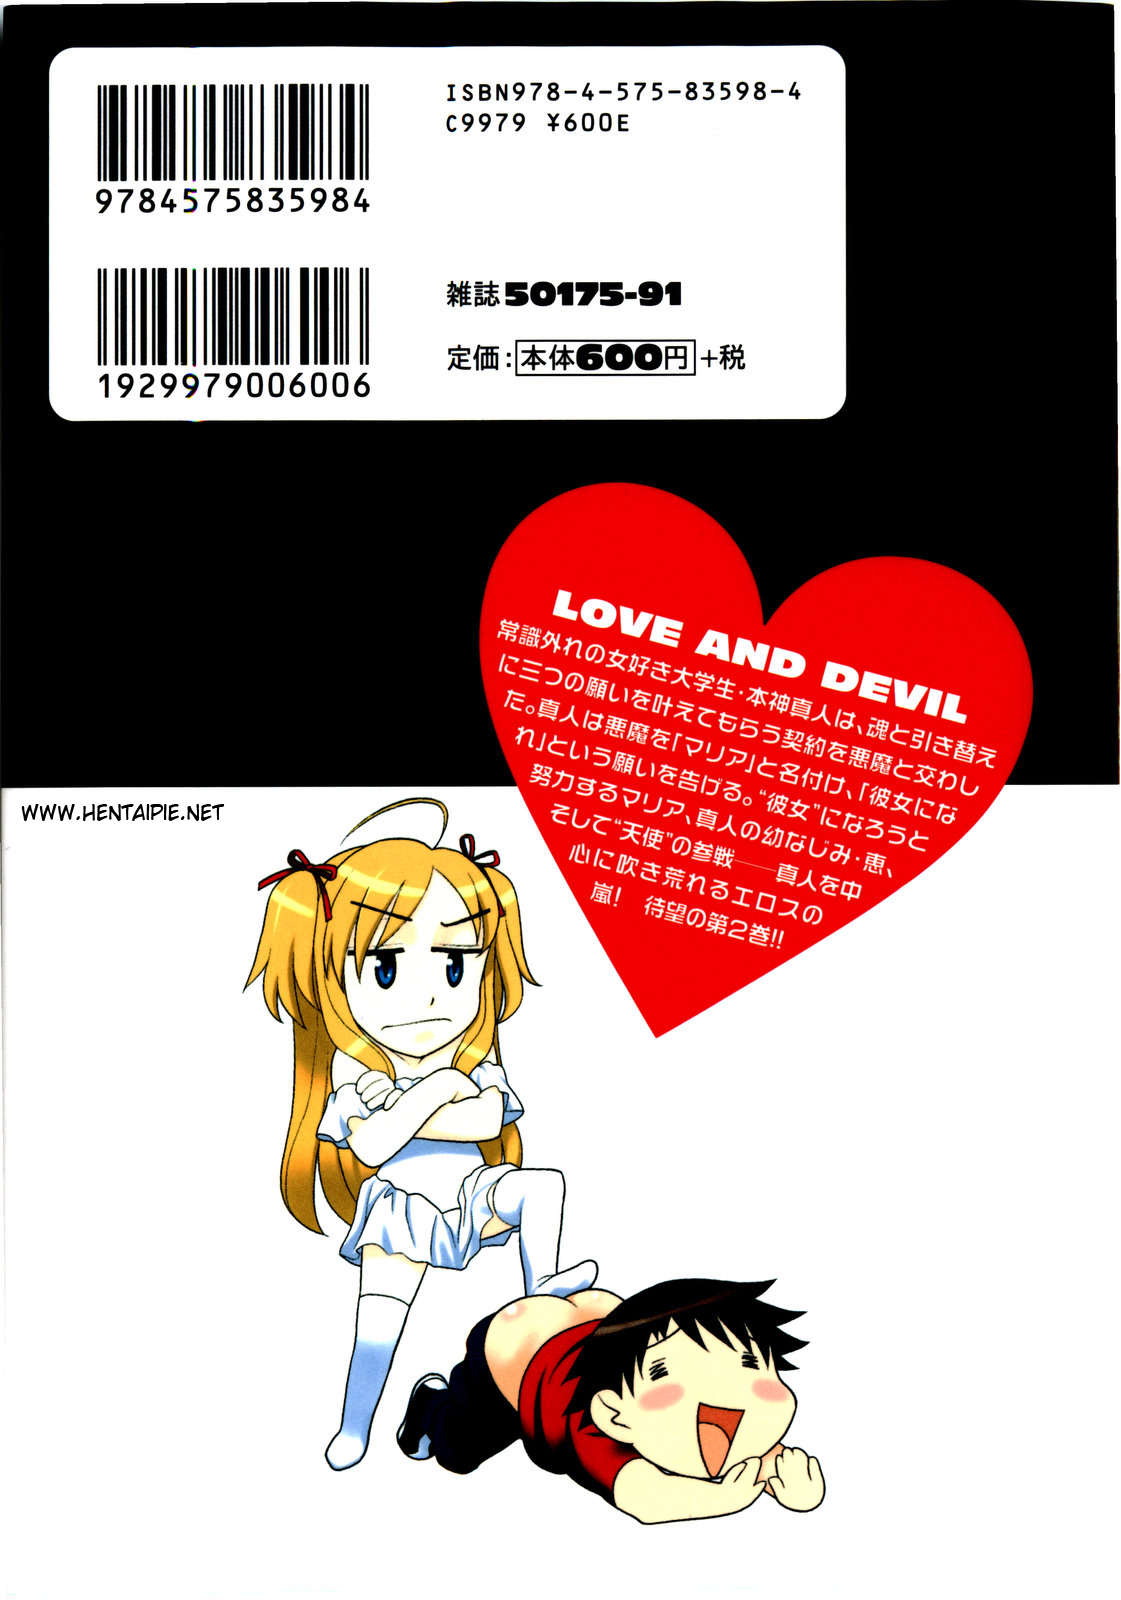 Love and Devil 10 